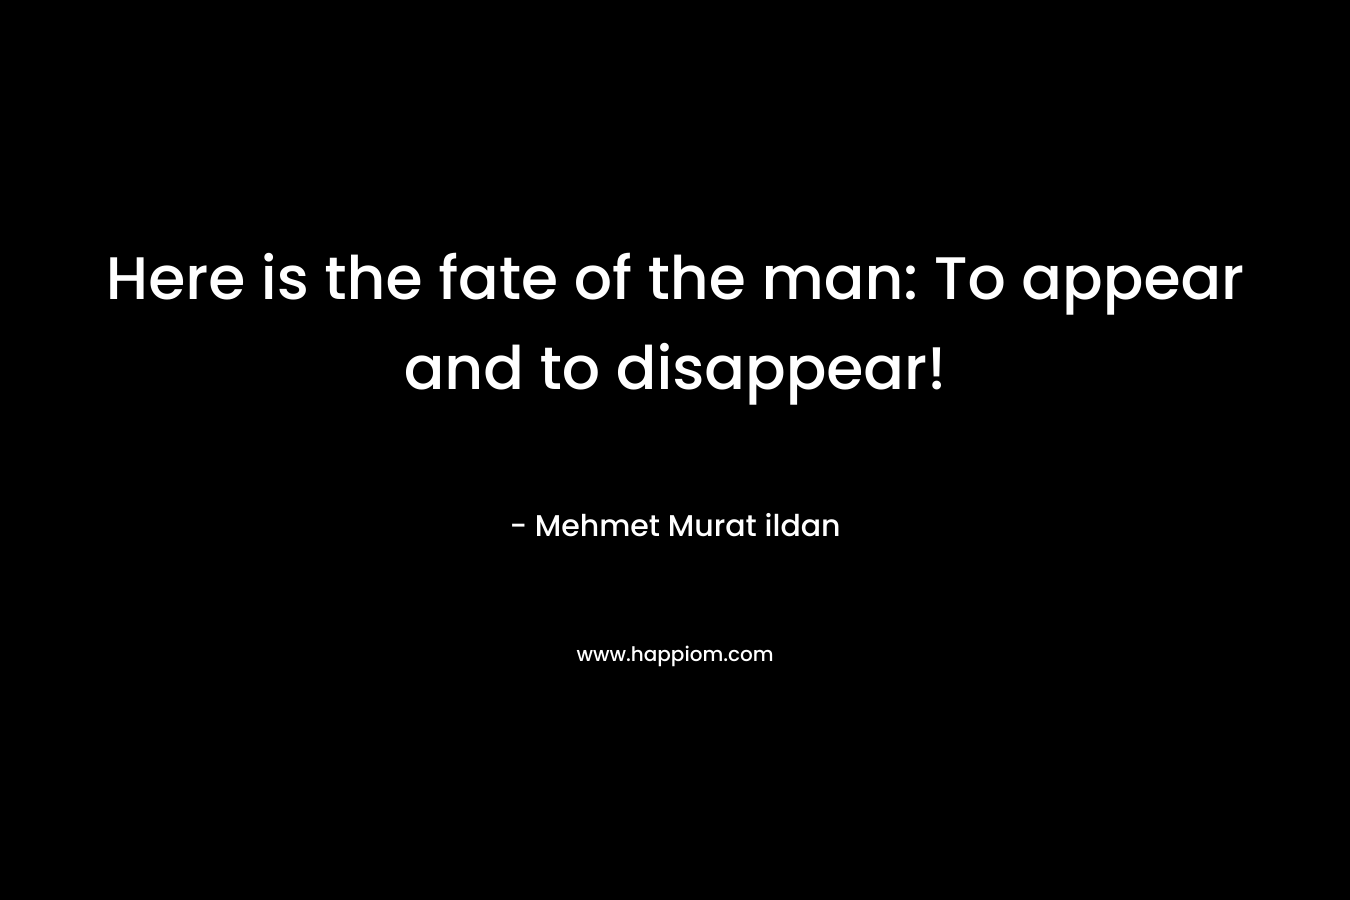 Here is the fate of the man: To appear and to disappear!